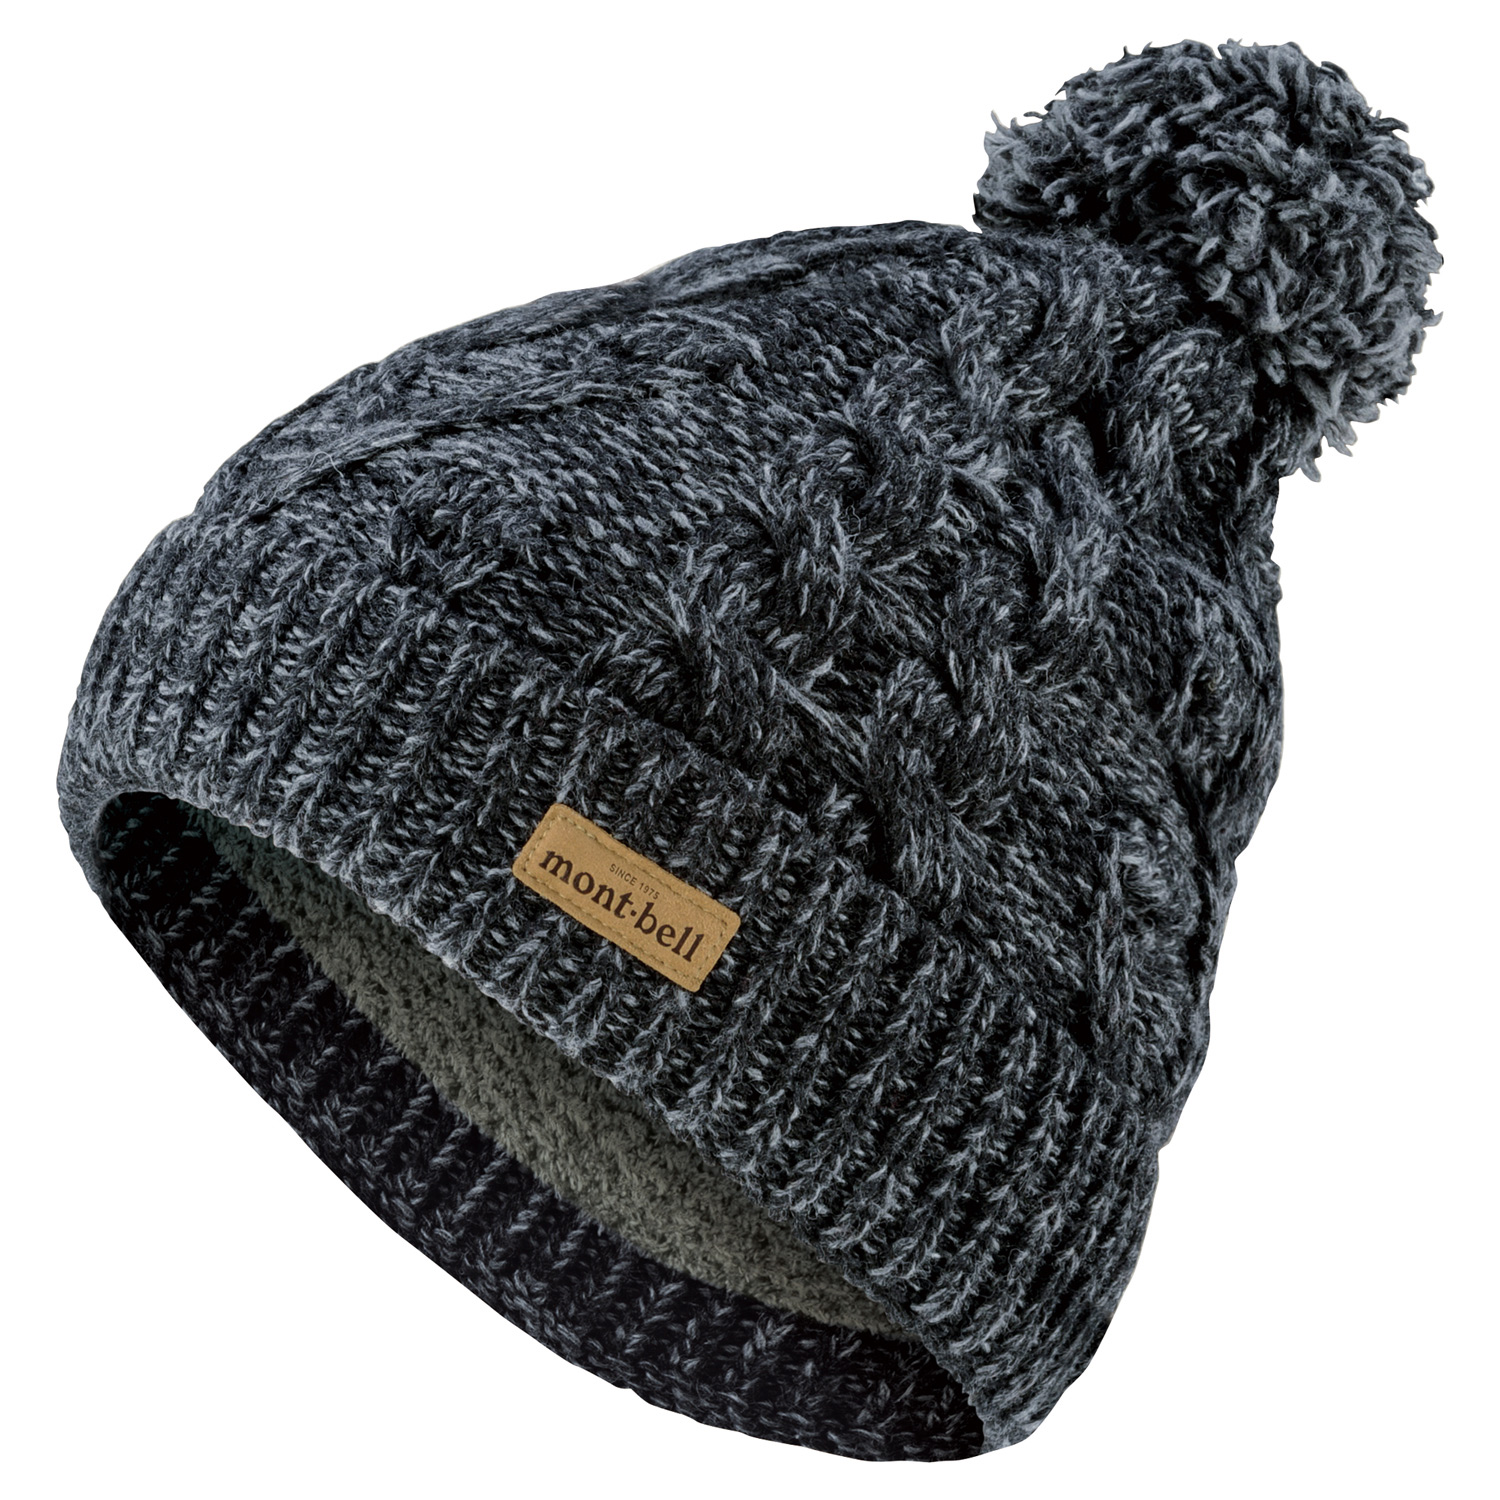 Watch Montbell Cable Knit Cap #1 America |